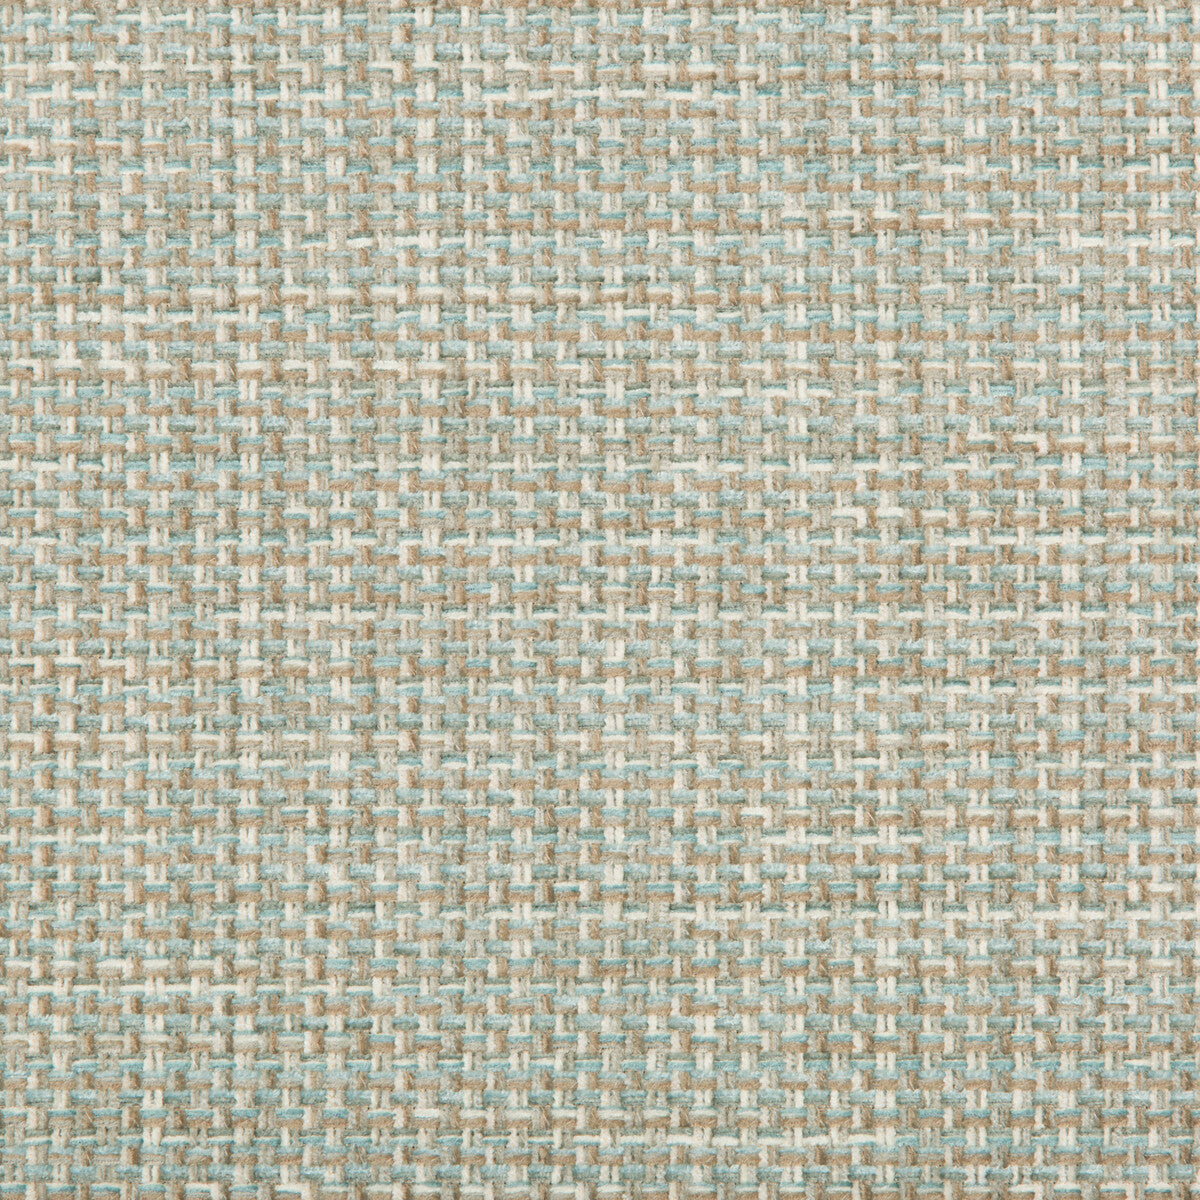 Westhigh fabric in spa color - pattern 35305.316.0 - by Kravet Basics in the Greenwich collection